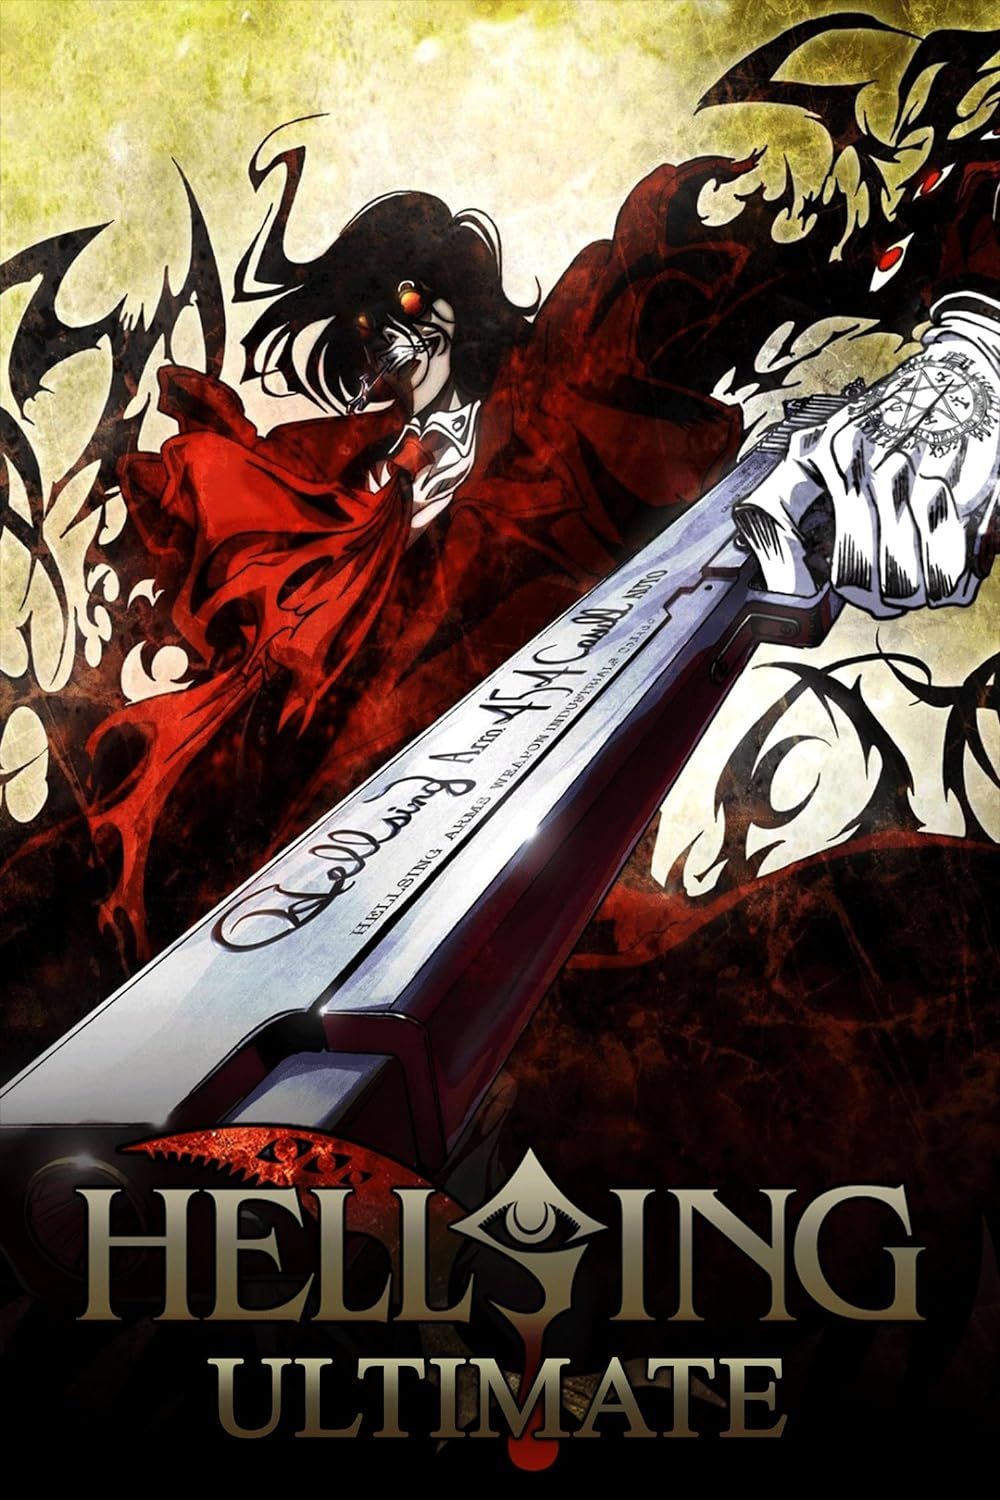 Alucard wields a sword on the poster for Hellsing Ultimate